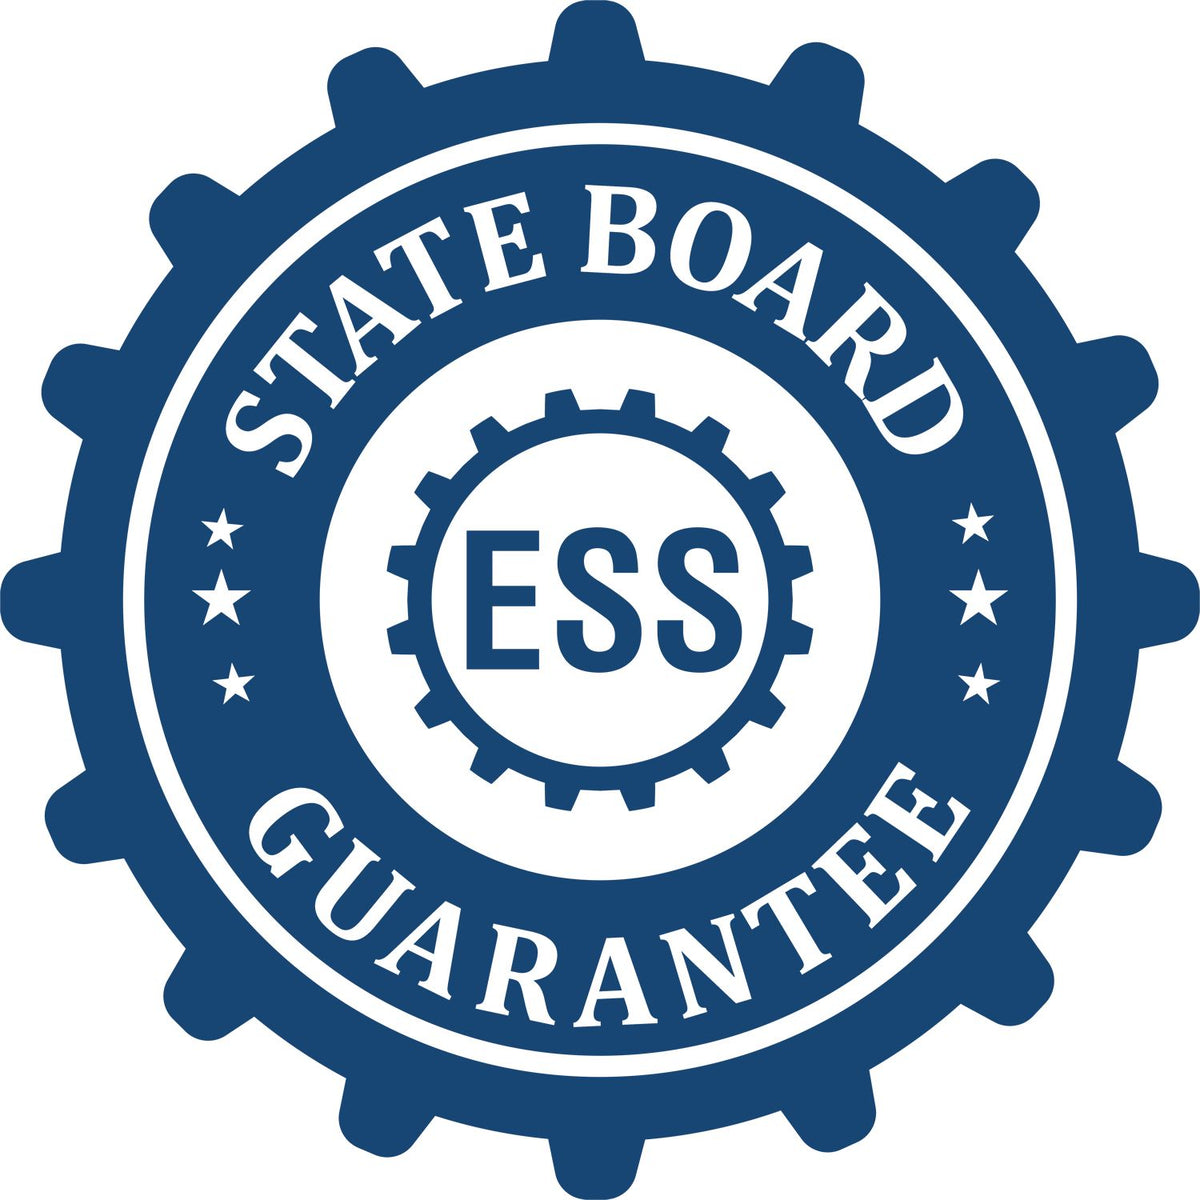 Professional Slim Pre-Inked Rubber Stamp of Seal 3007 State Board Guarantee